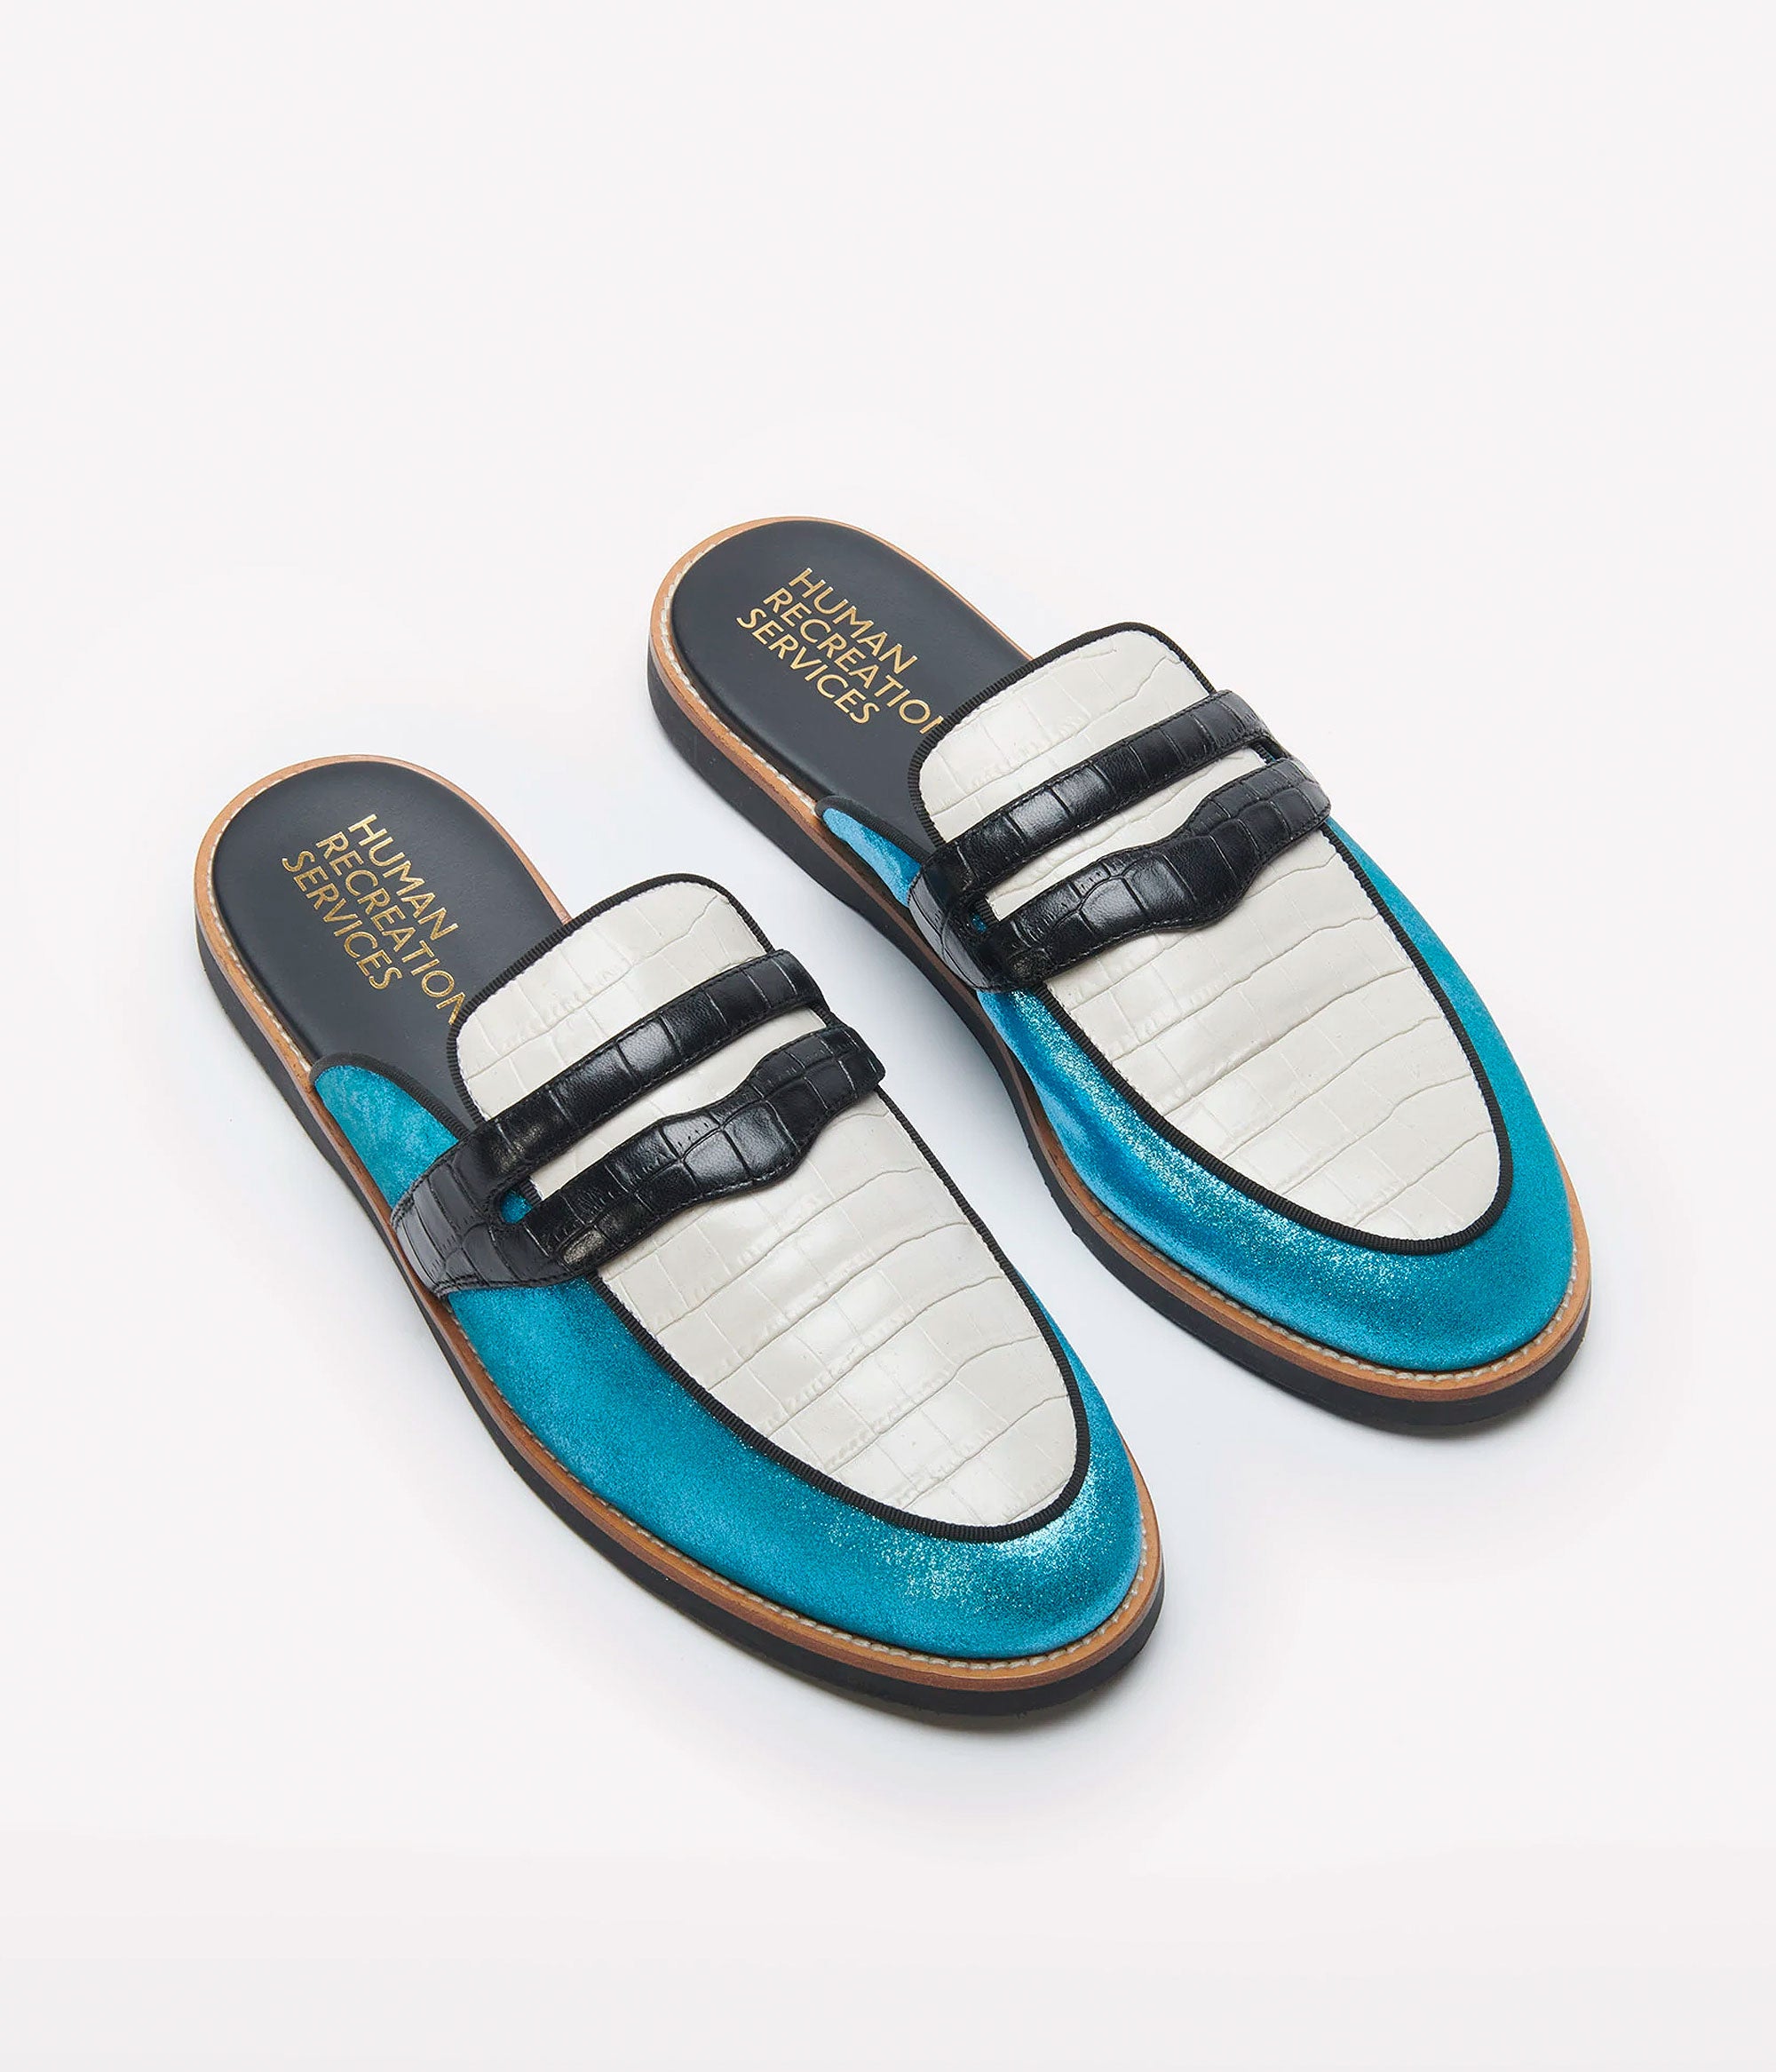 HUMAN RECREATIONAL SERVICES PALAZZO SLIPPER IN BLACK BONE AND LIGHT BLUE MADE WITH ITALIAN CALF SKIN